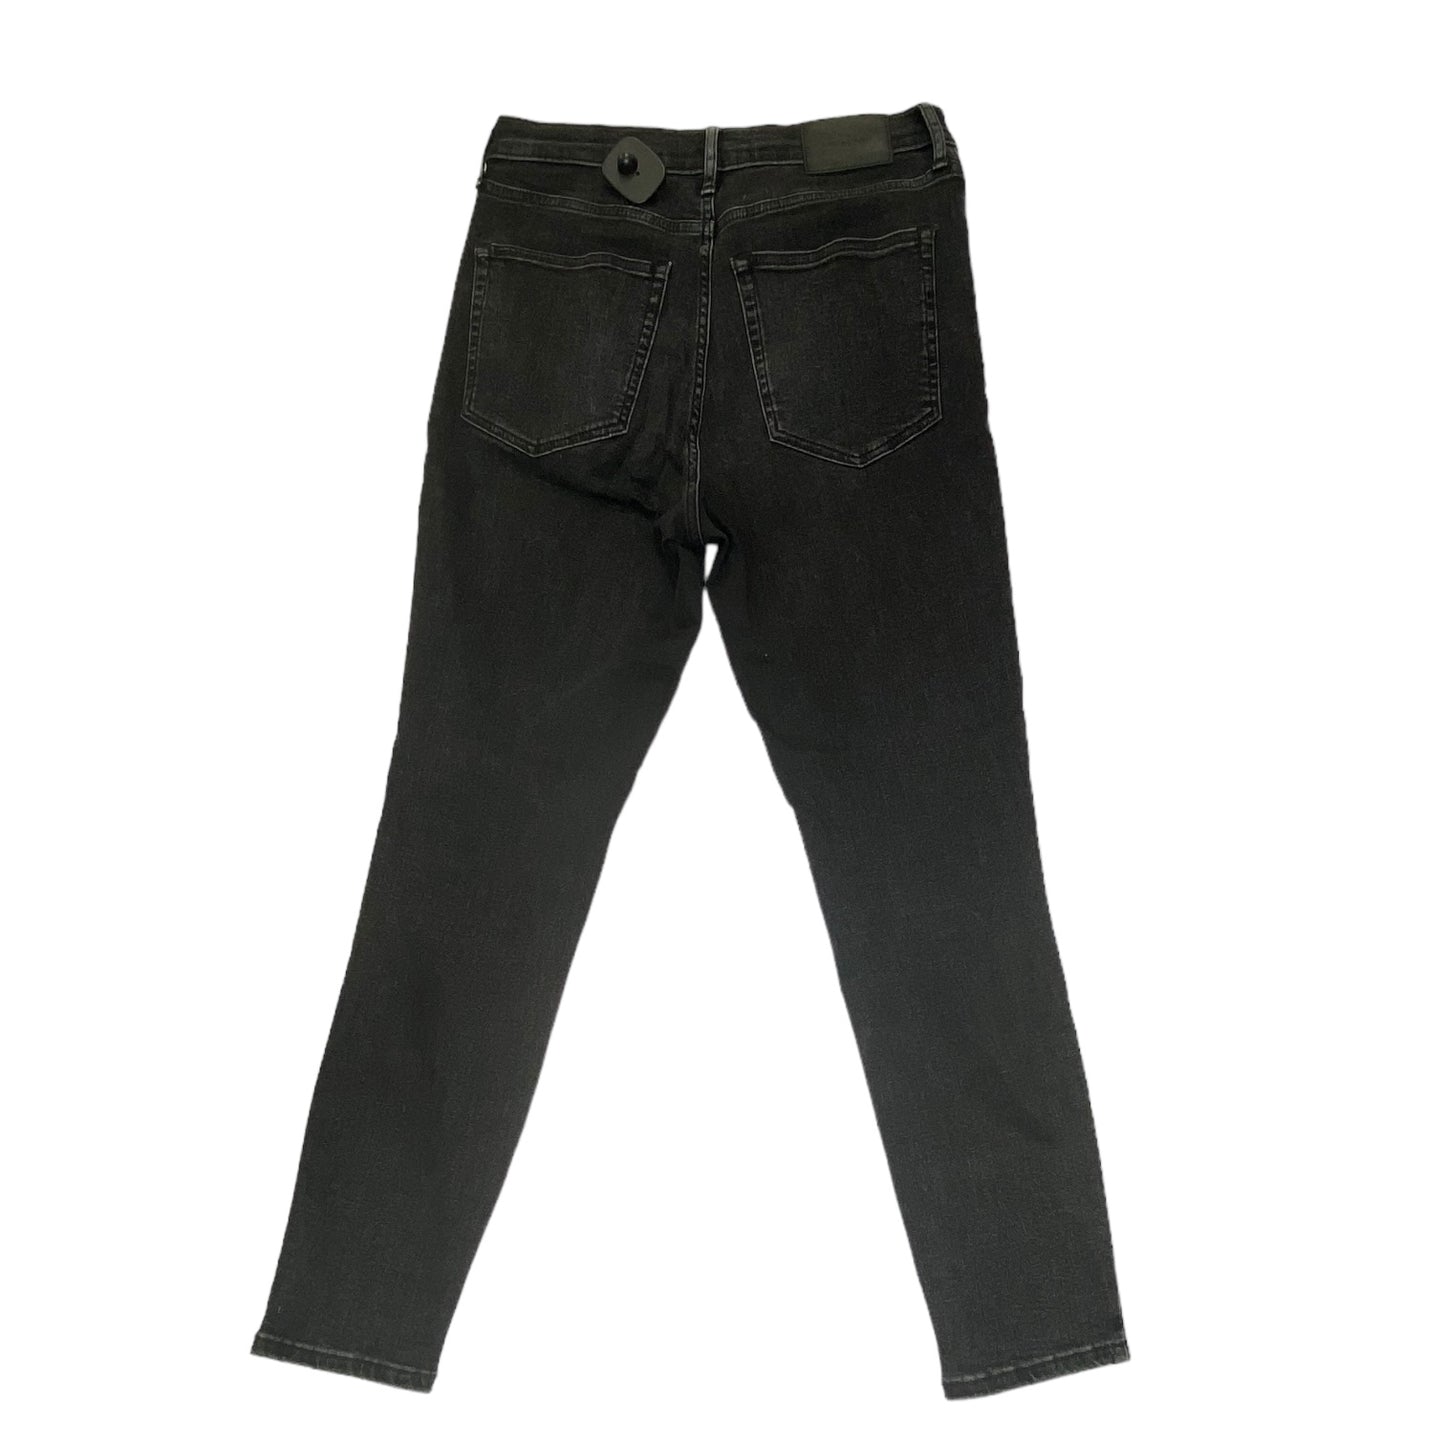 Jeans Skinny By Everlane  Size: 10